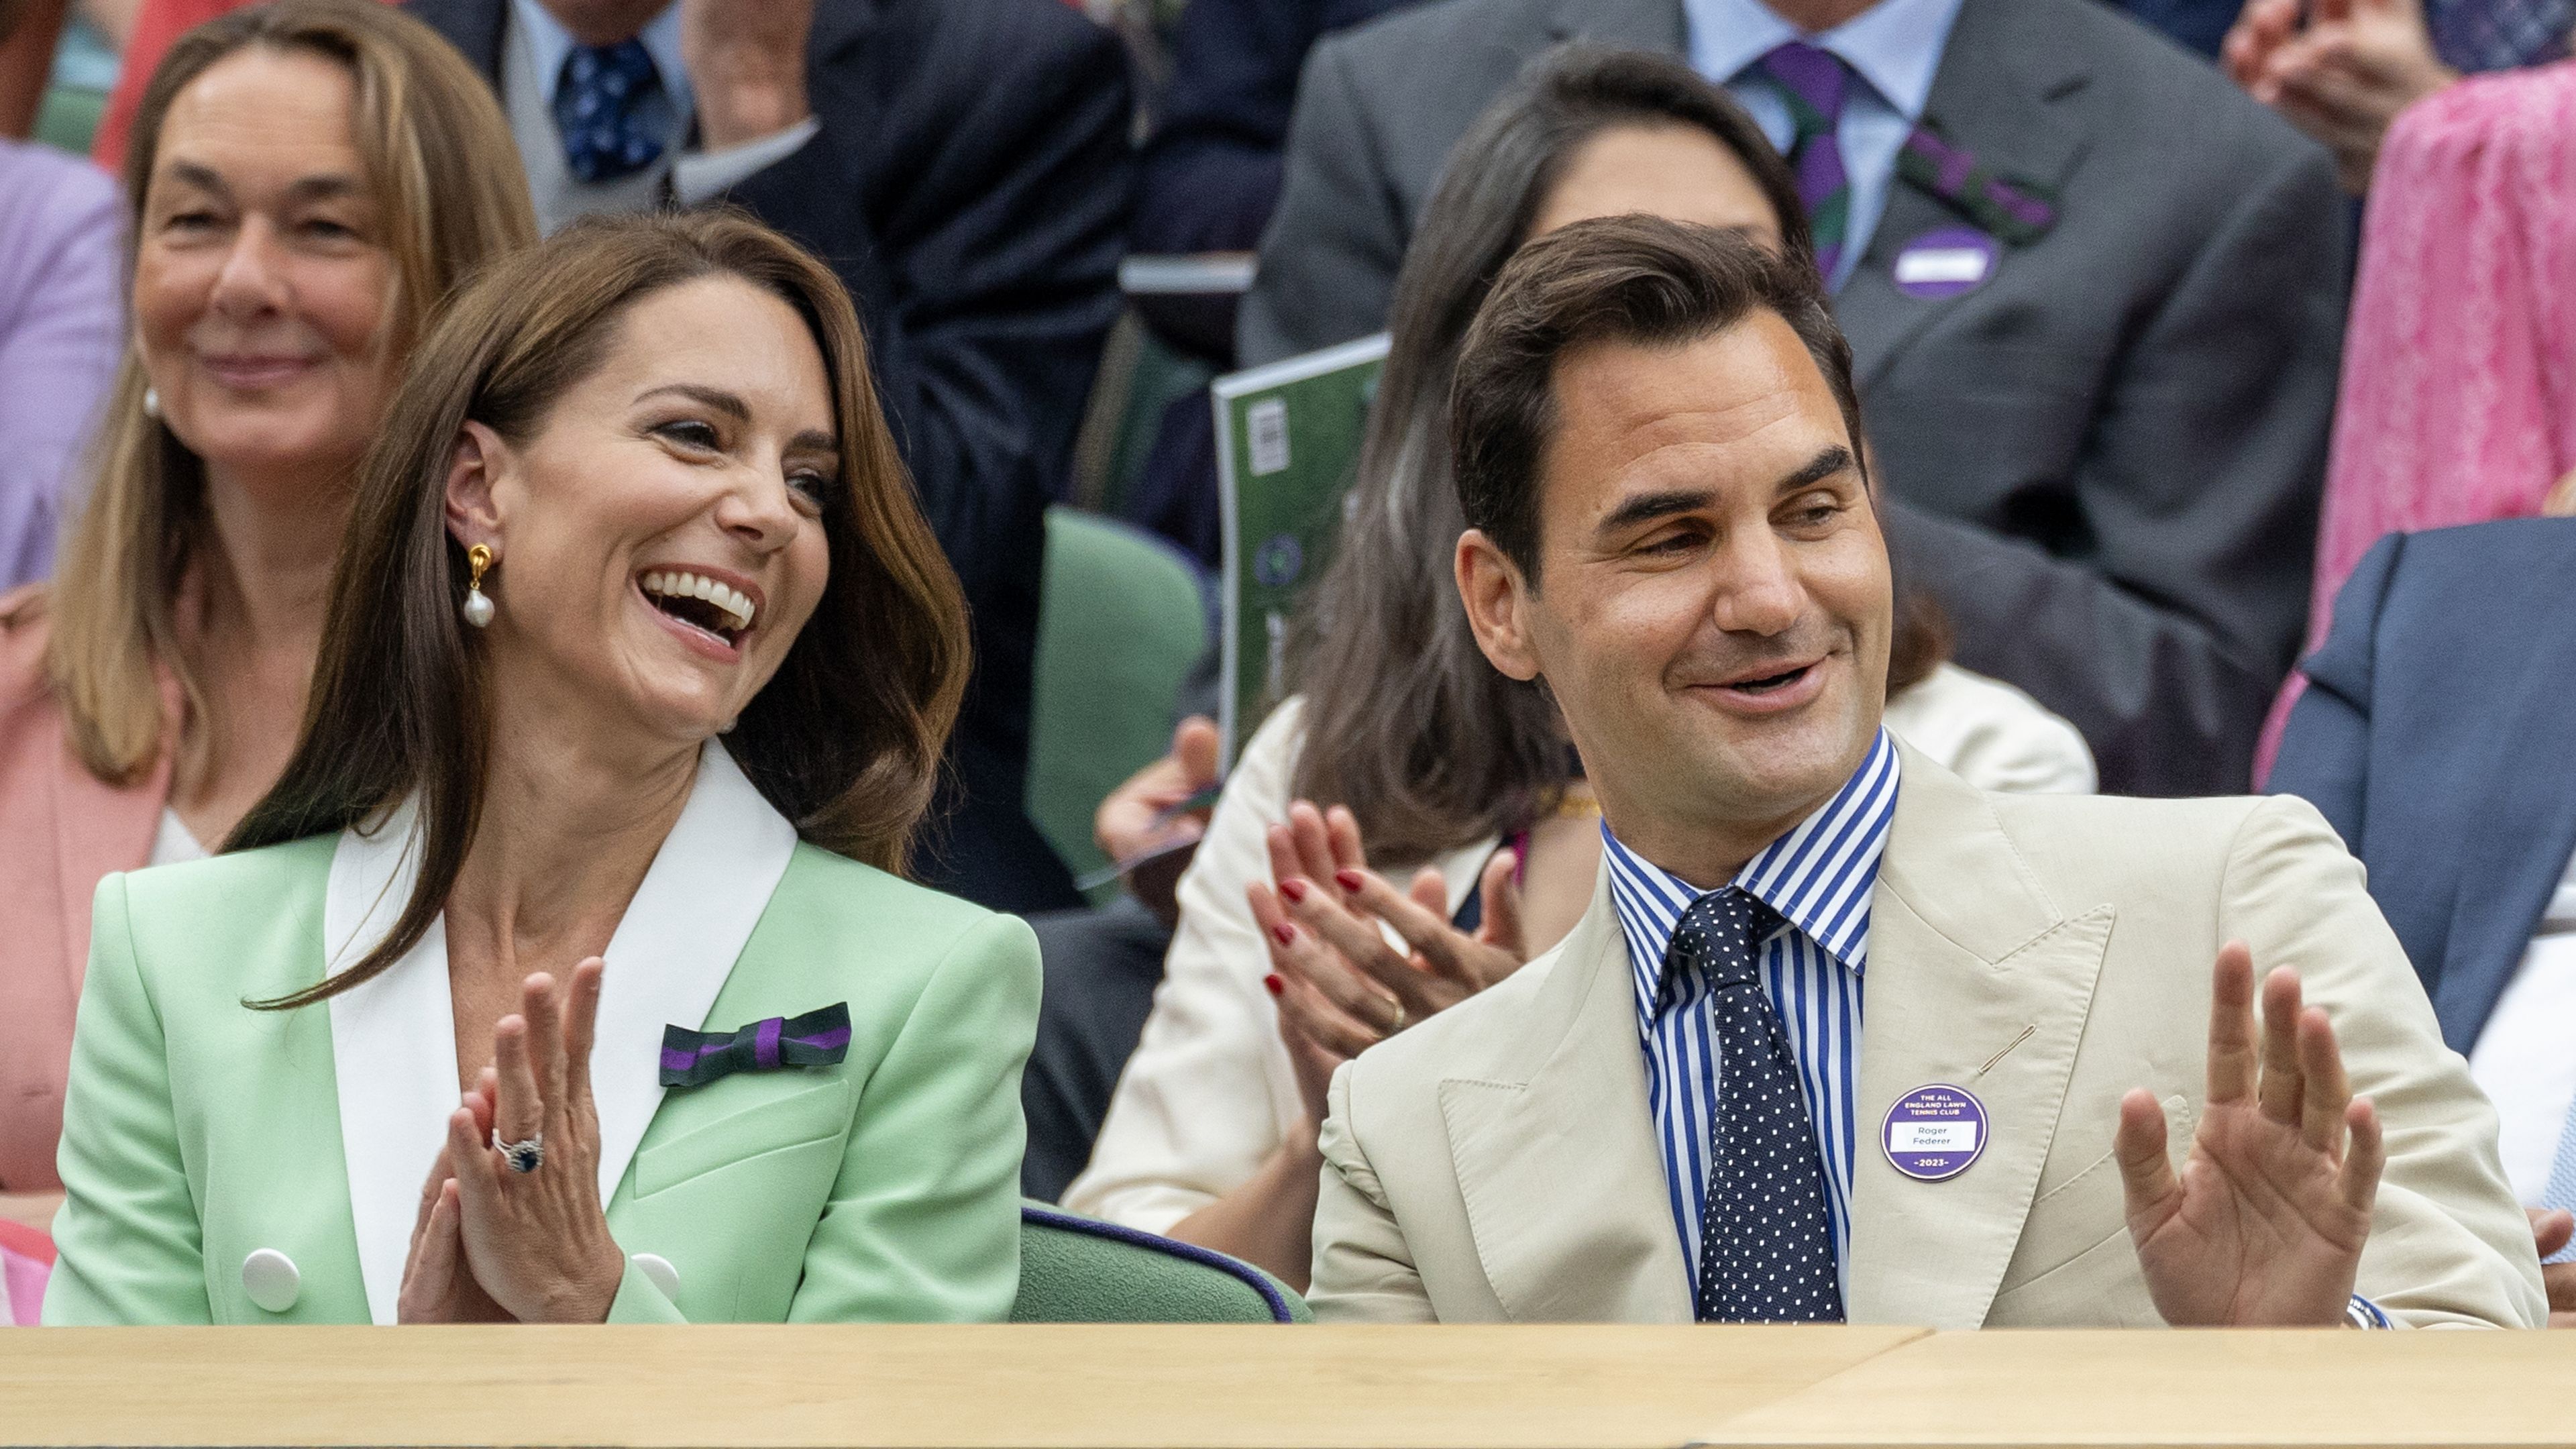 Roger Federer and Princess Kate watch the action at Wimbledon.